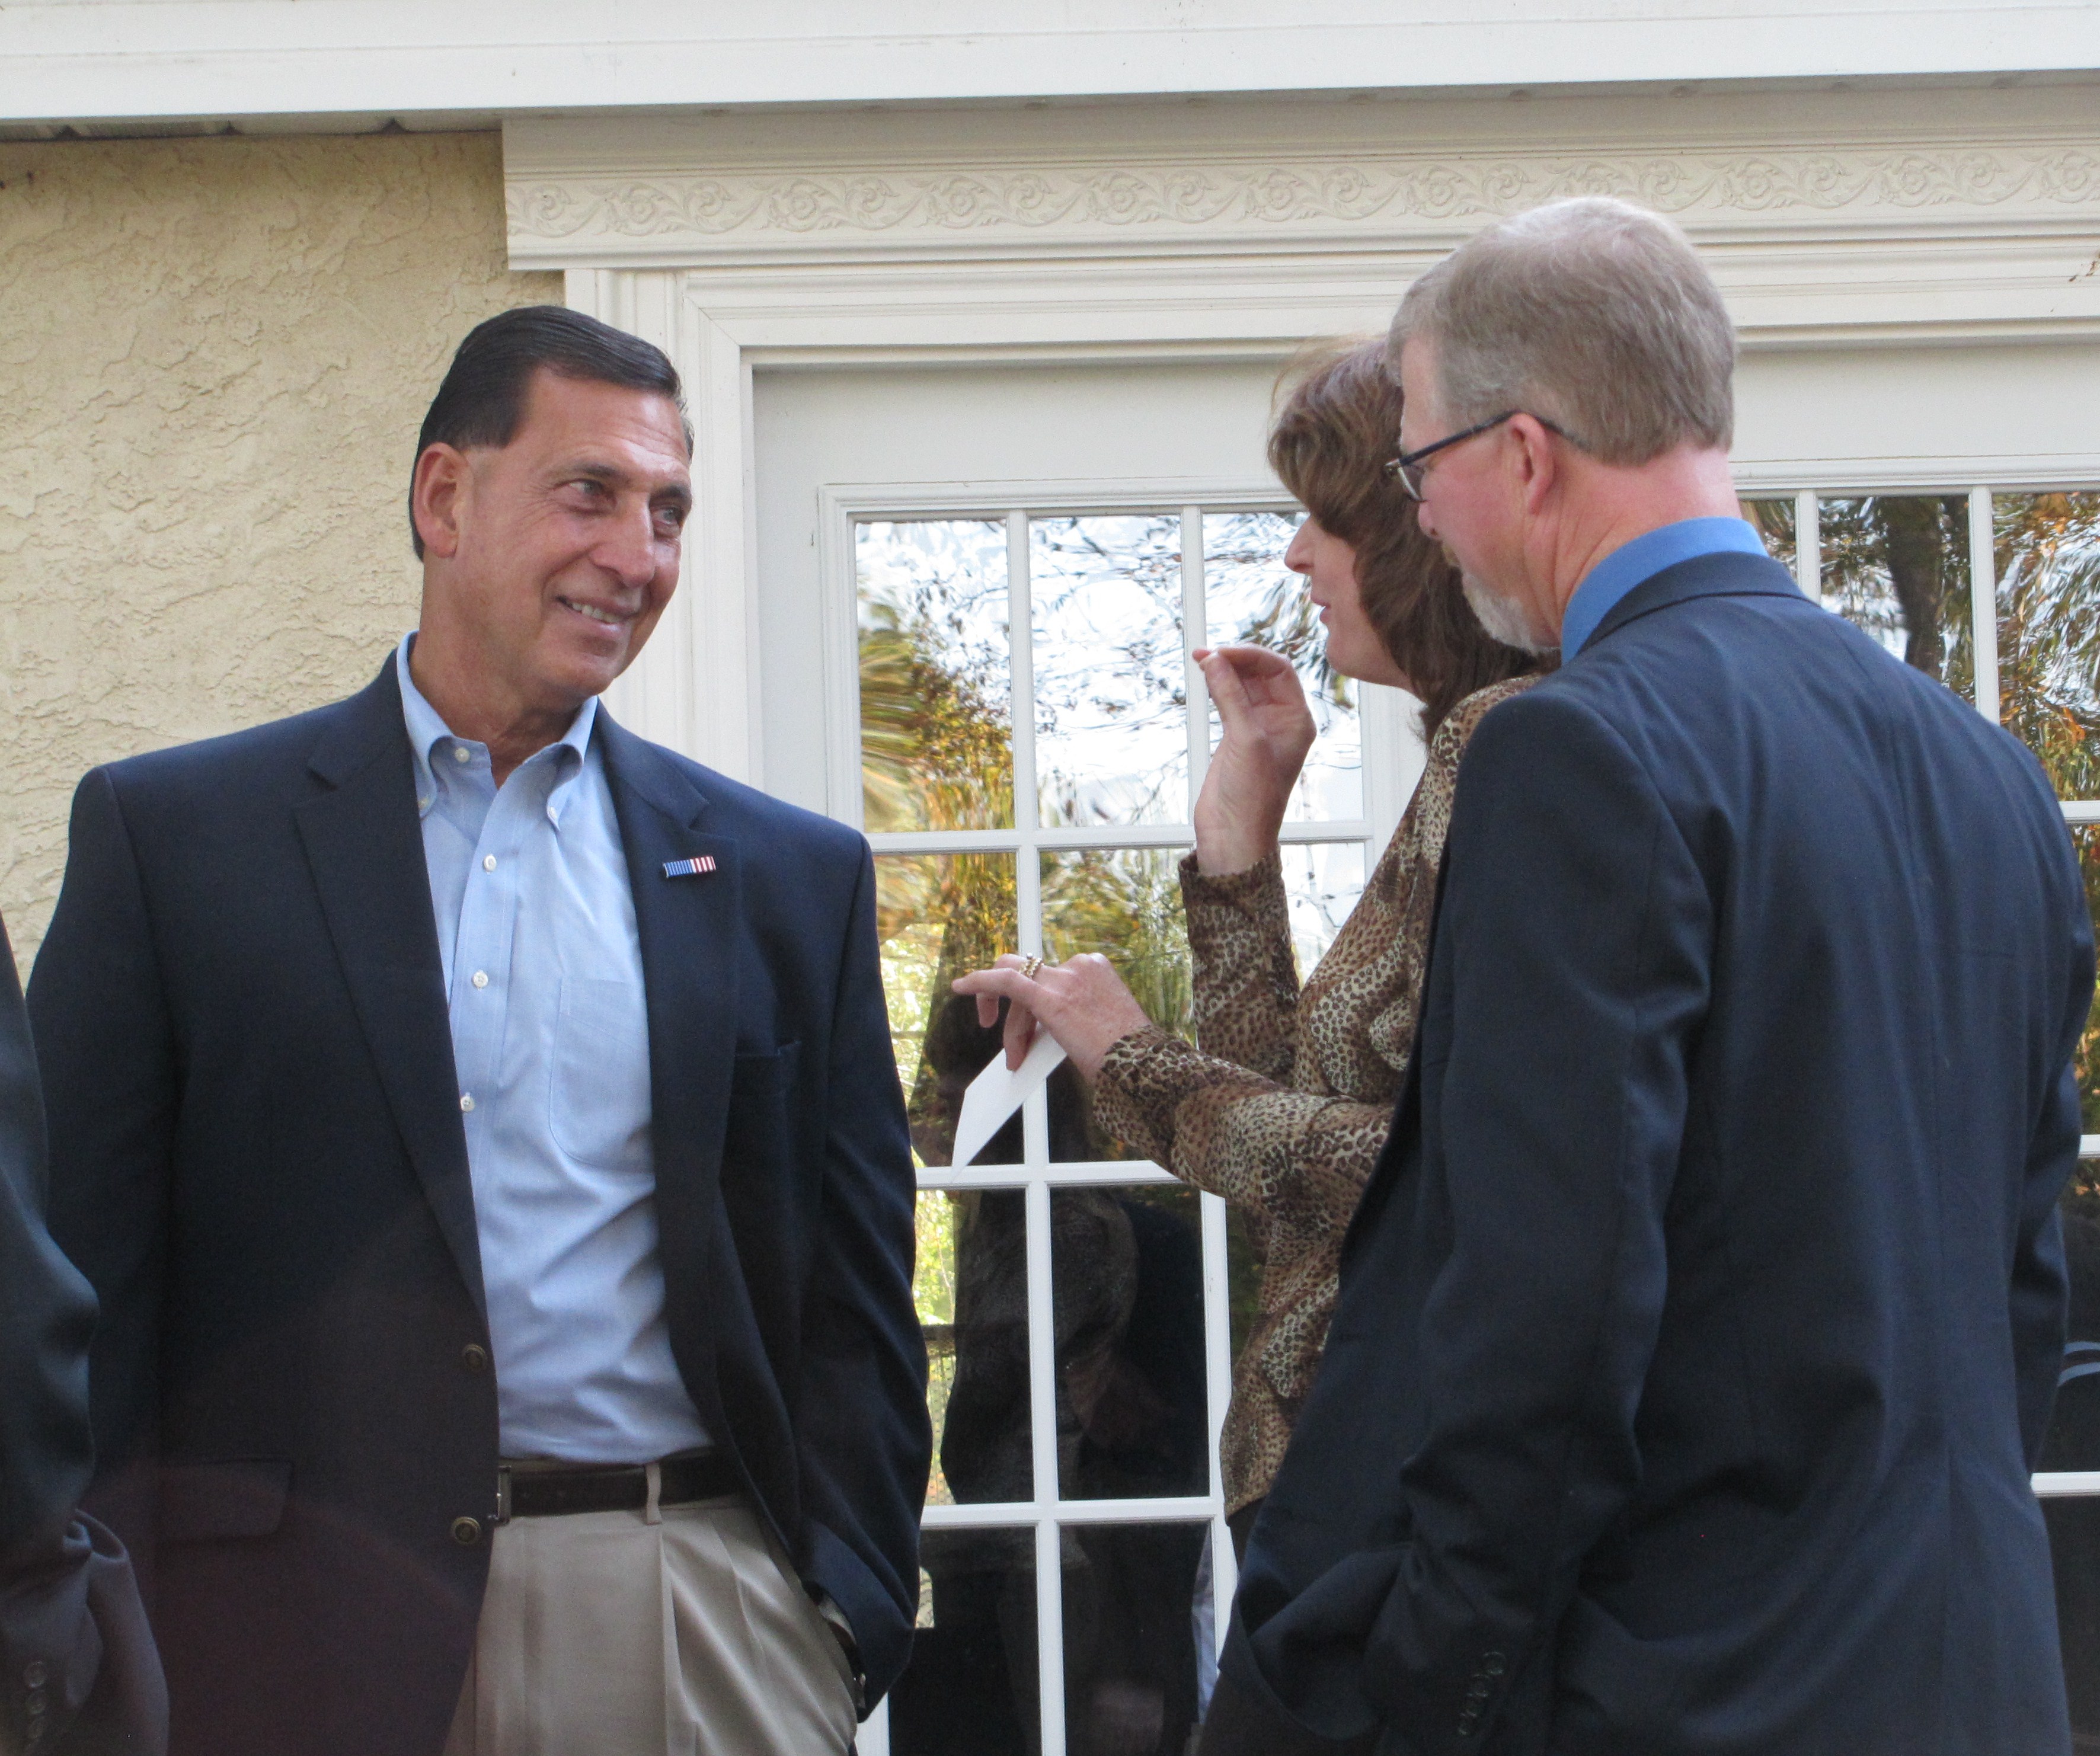 LoBiondo: ObamaCare Opinion “Completely Against the Limited Government Principles Our Founding Fathers Had Intended”